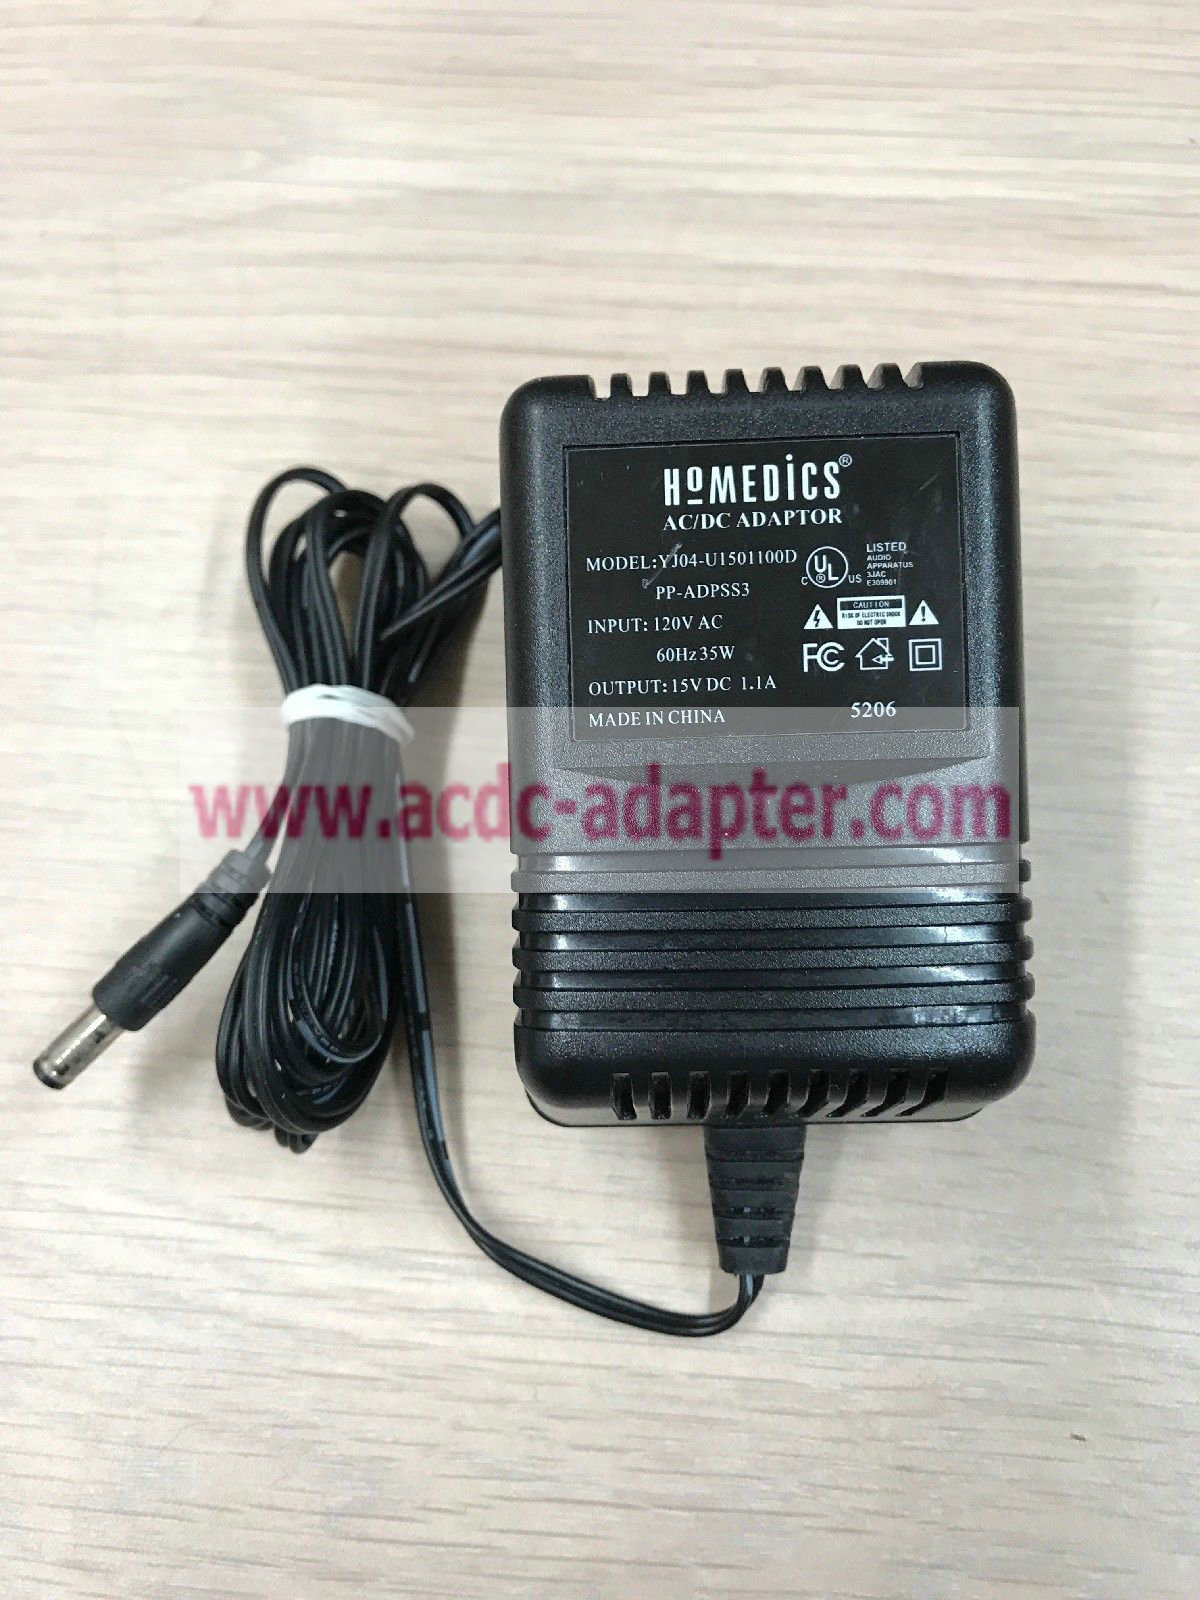 Genuine 15V 1.1A PP-ADPSS3 Homedics AC Adapter YJ04-U1501100D Power Supply Charger